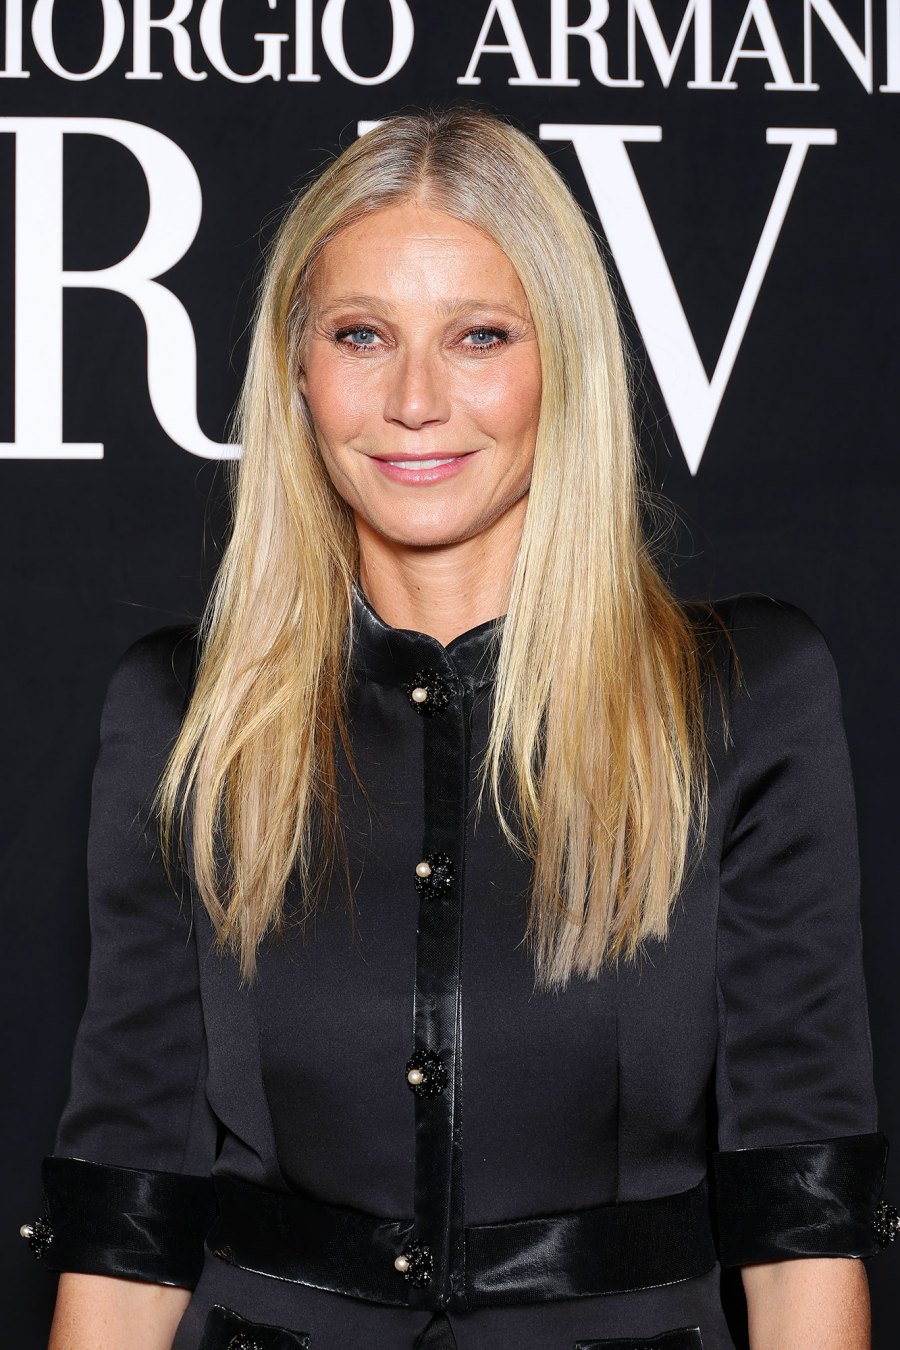 Gwyneth Paltrow Celebrity Moms Who Disappeared or Retired From Hollywood After Having Kids